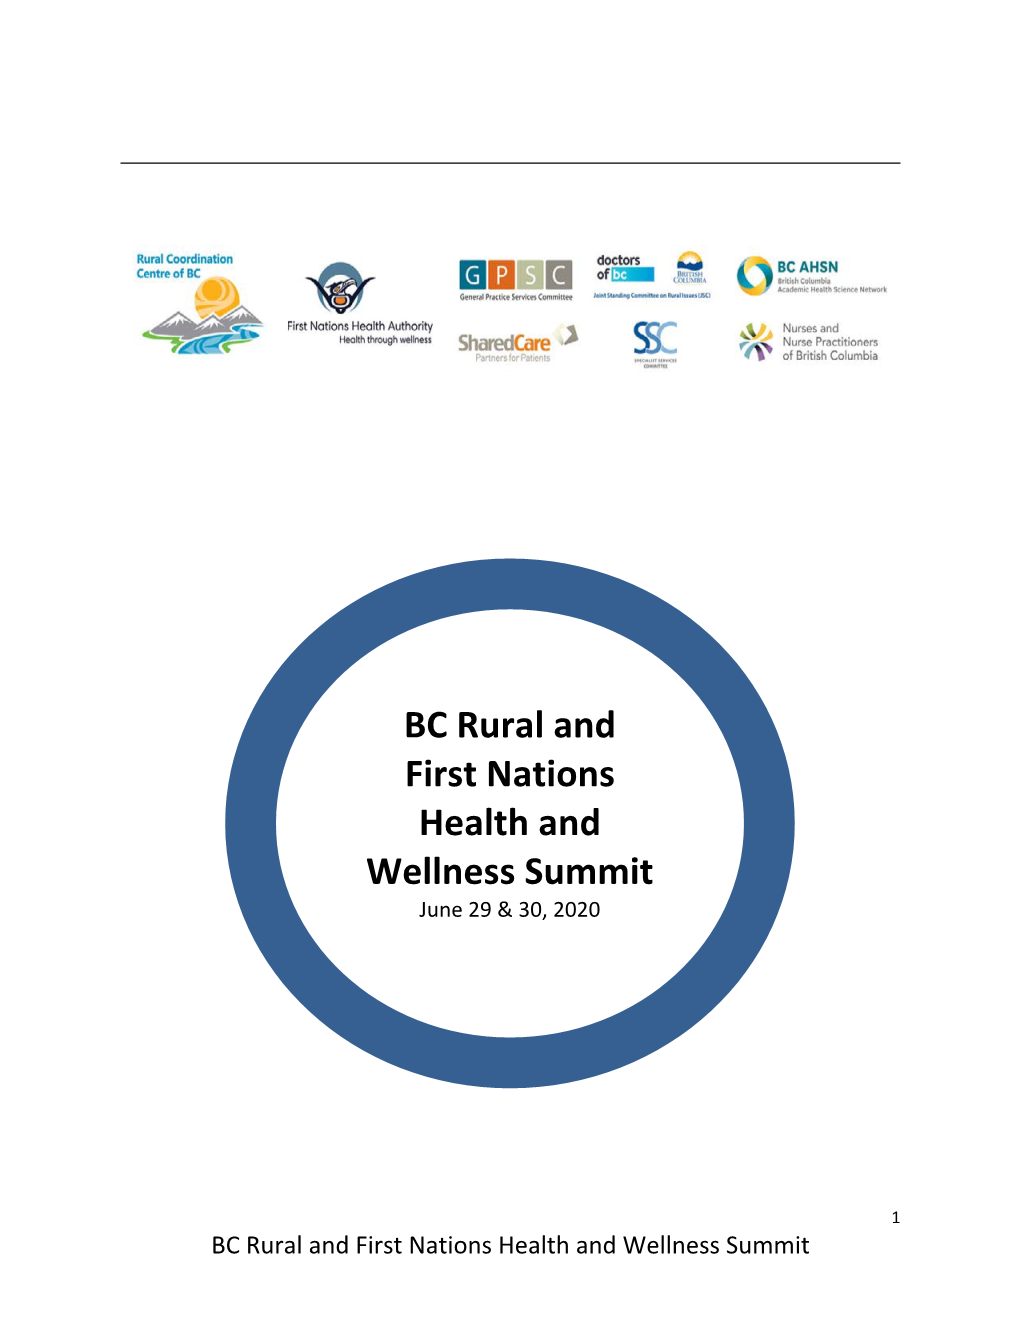 BC Rural and First Nations Health and Wellness Summit June 29 & 30, 2020